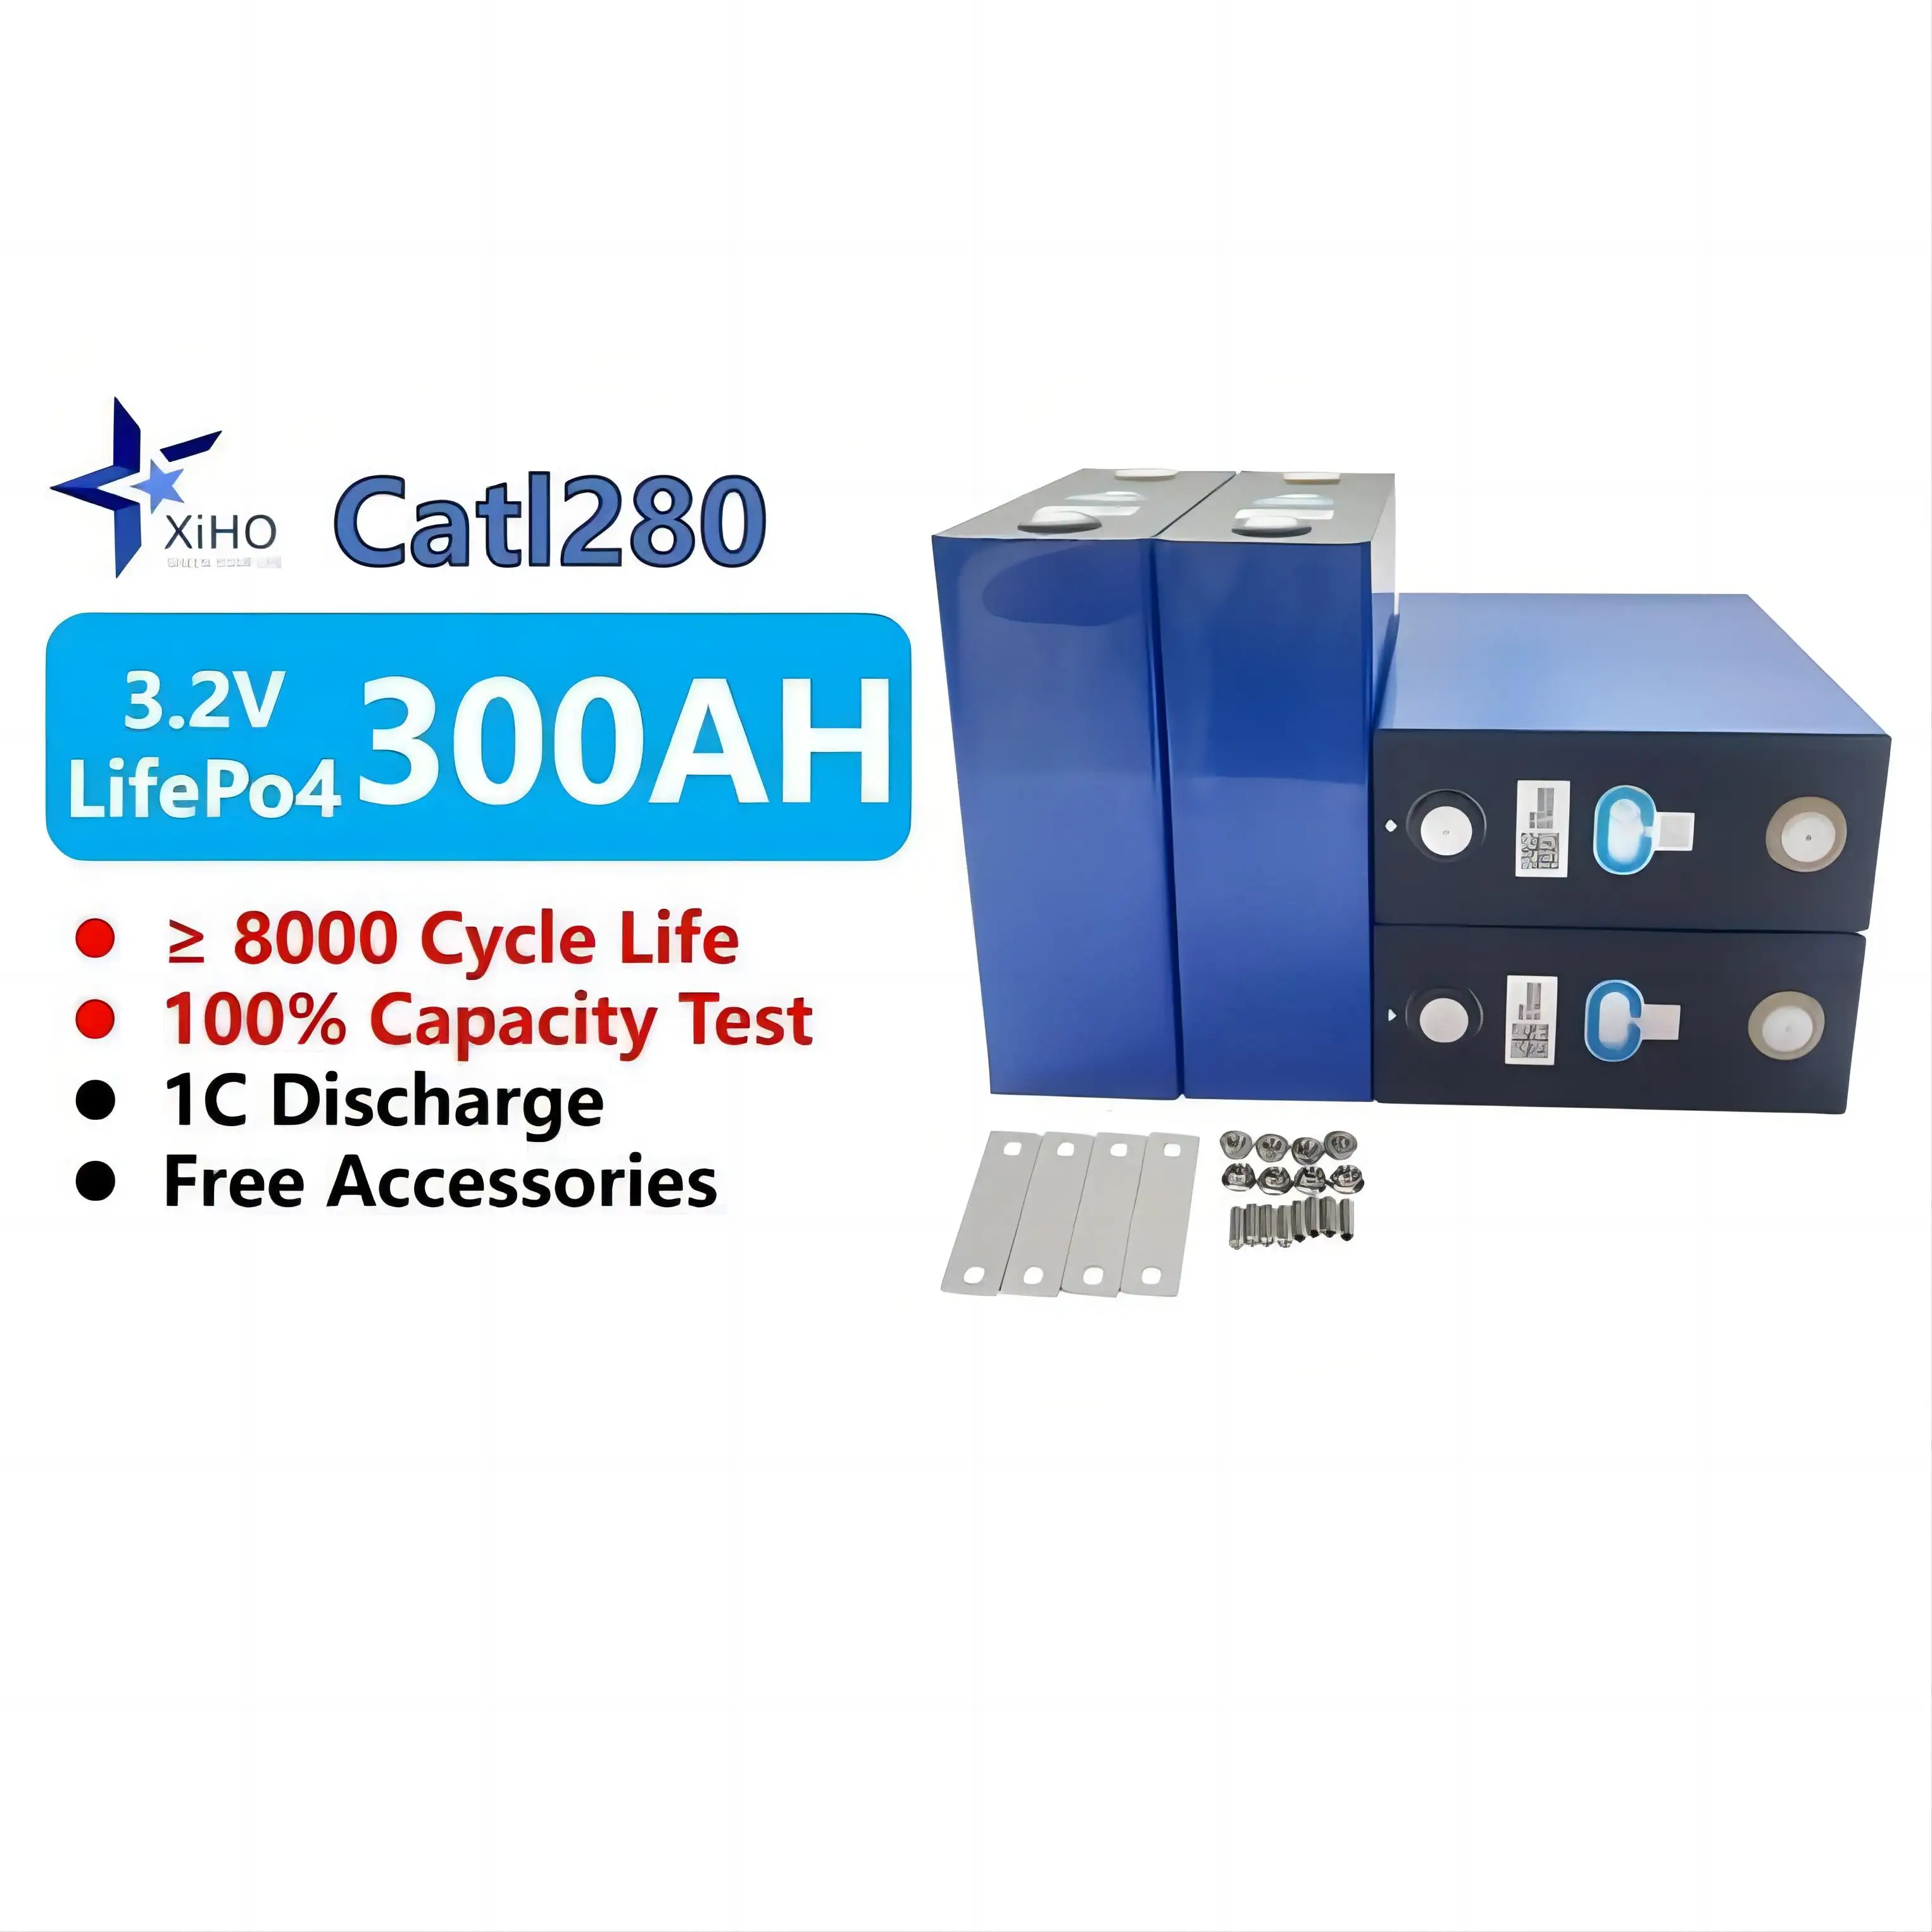 Xiho Catl 3.2V 320Ah 314Ah 302Ah 280Ah Lifepo4 Cell Battery Rechargeable Prismatic Lithium Home Energy Storage Solar Battery